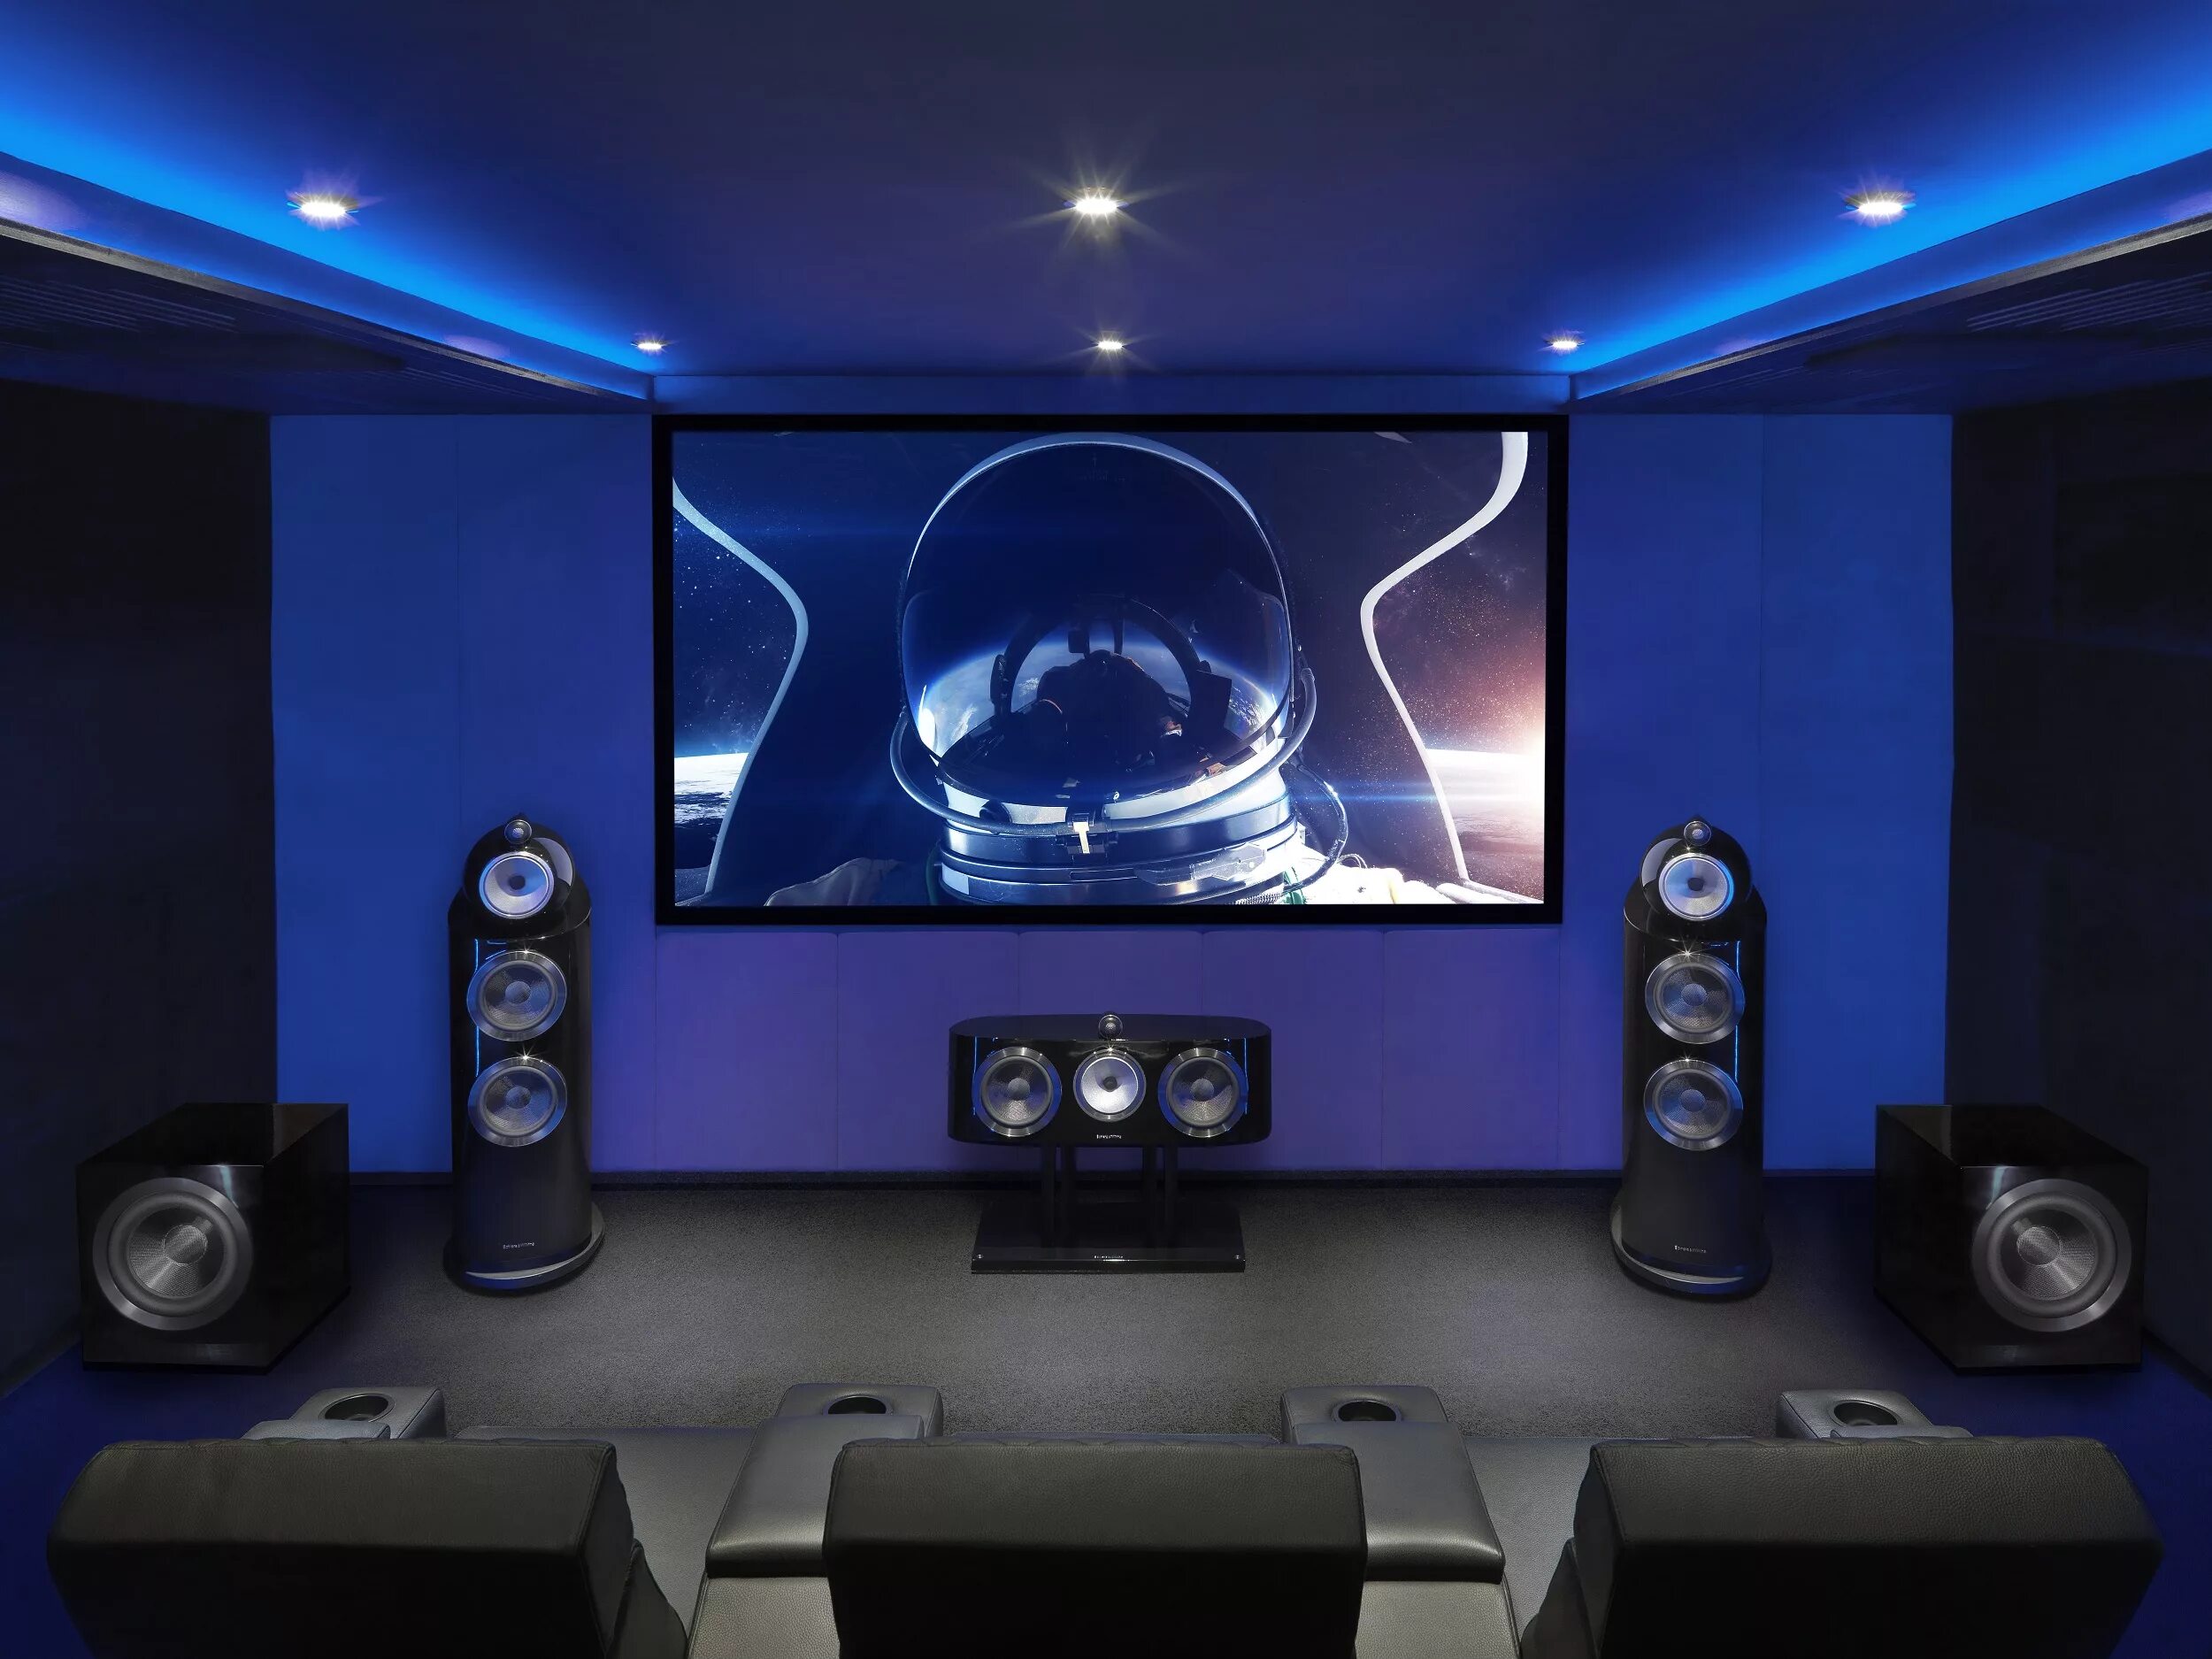 Сабвуфер Bowers & Wilkins db2d. Сабвуфер b&w db3d Black. Сабвуфер b&w db2d Matt White. Сабвуфер b&w db3d Satin White. Home theater systems